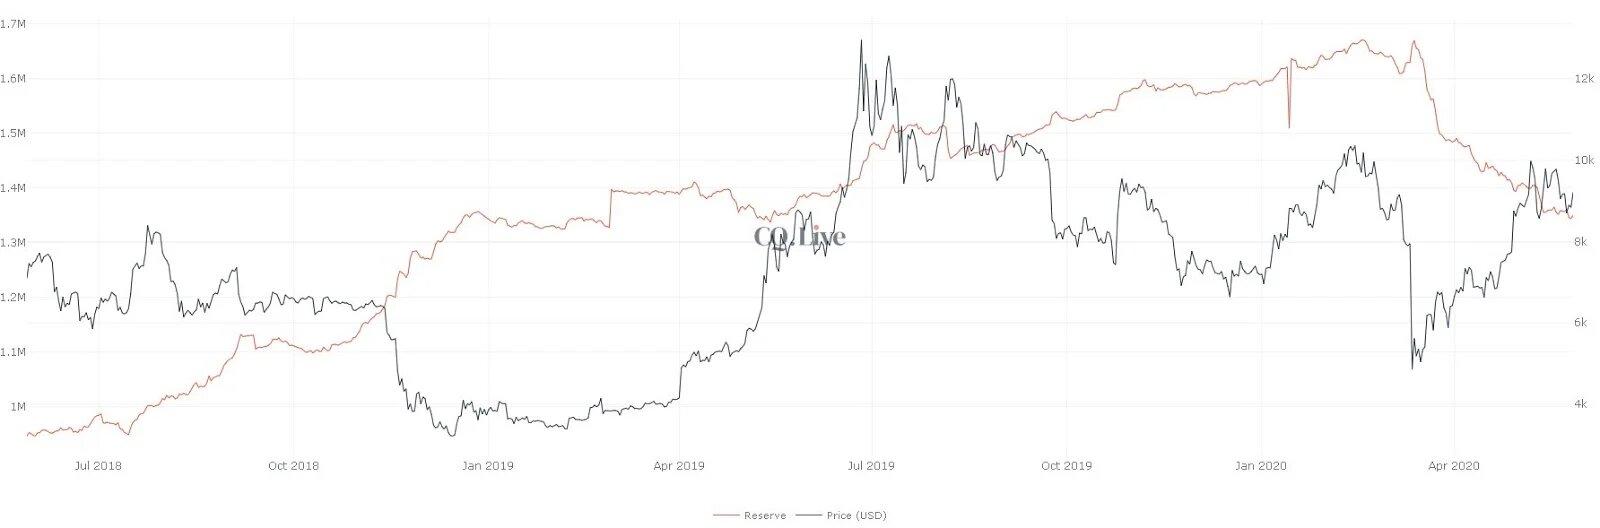 Top crypto exchanges record 1-year low Bitcoin reserves. Source: CQ Live